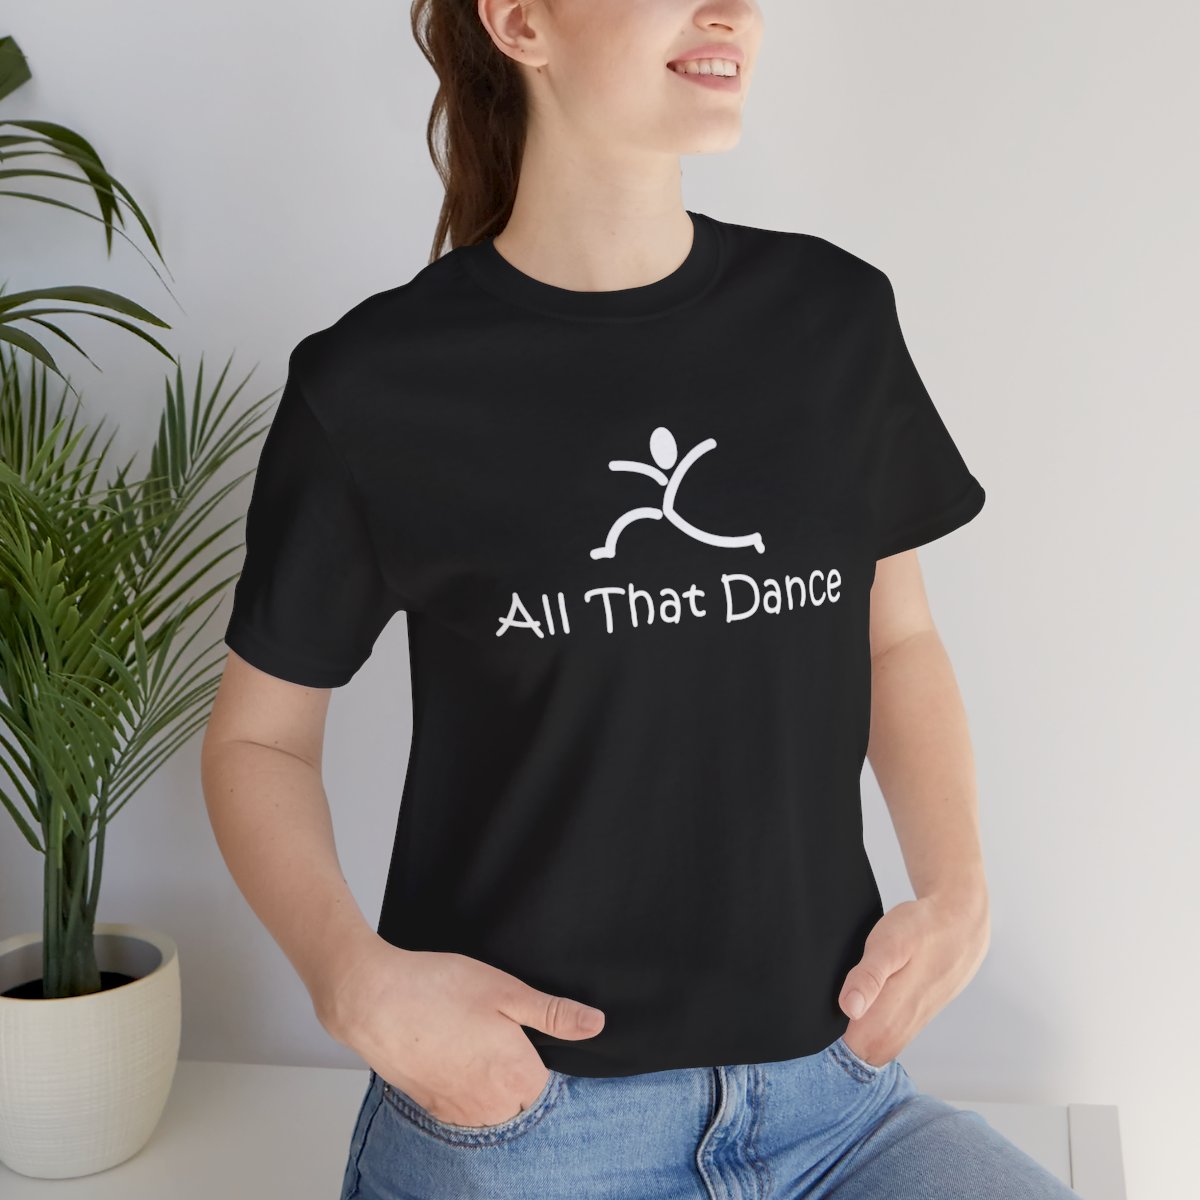 ADULT SIZES - All That Dance Tshirts product thumbnail image